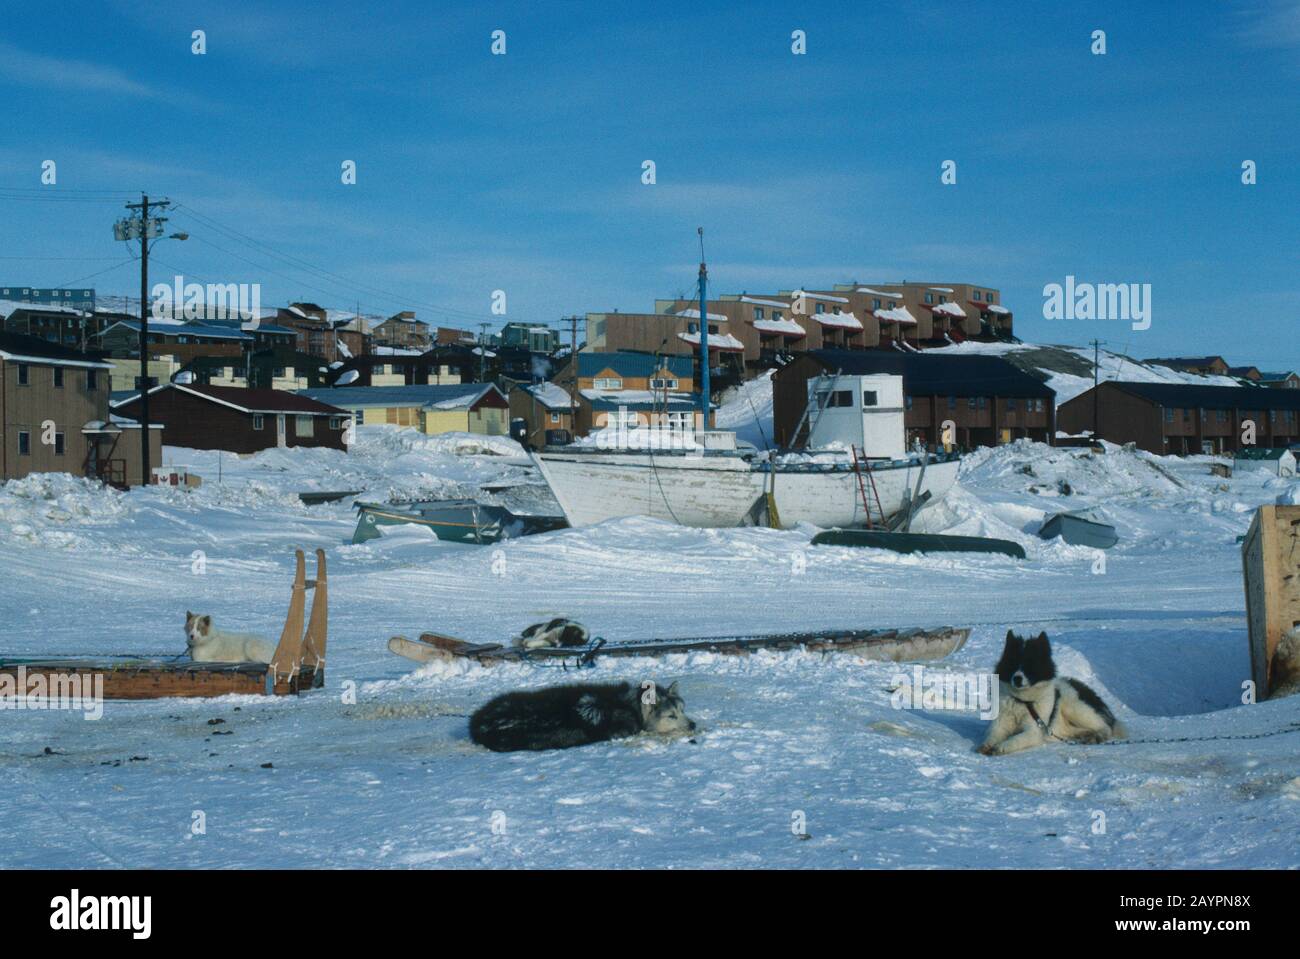 Huskies are chained up in the winter in Iqaluit on Baffin Island in Nunavut, Canada. Stock Photo